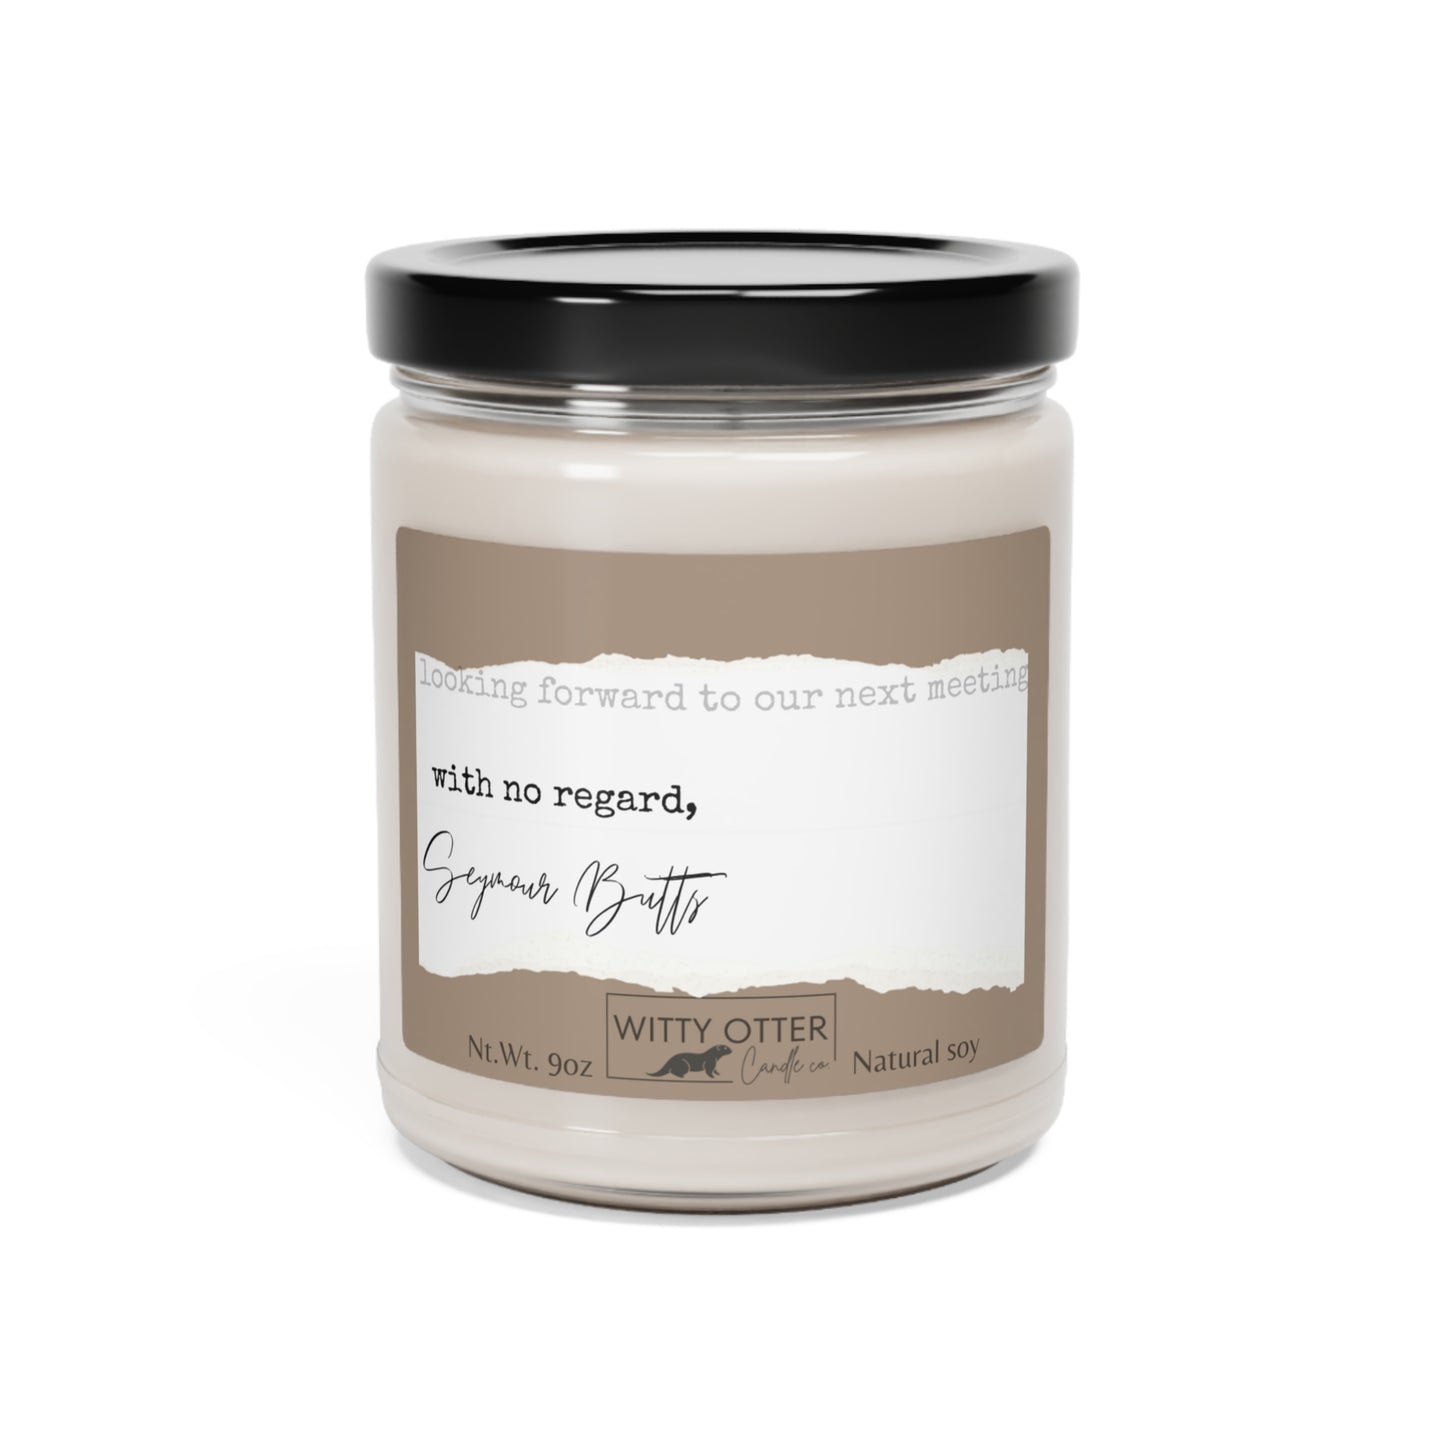 Hilarious office "signature" scented Soy Candle, 9oz - "with no regard" signed candle